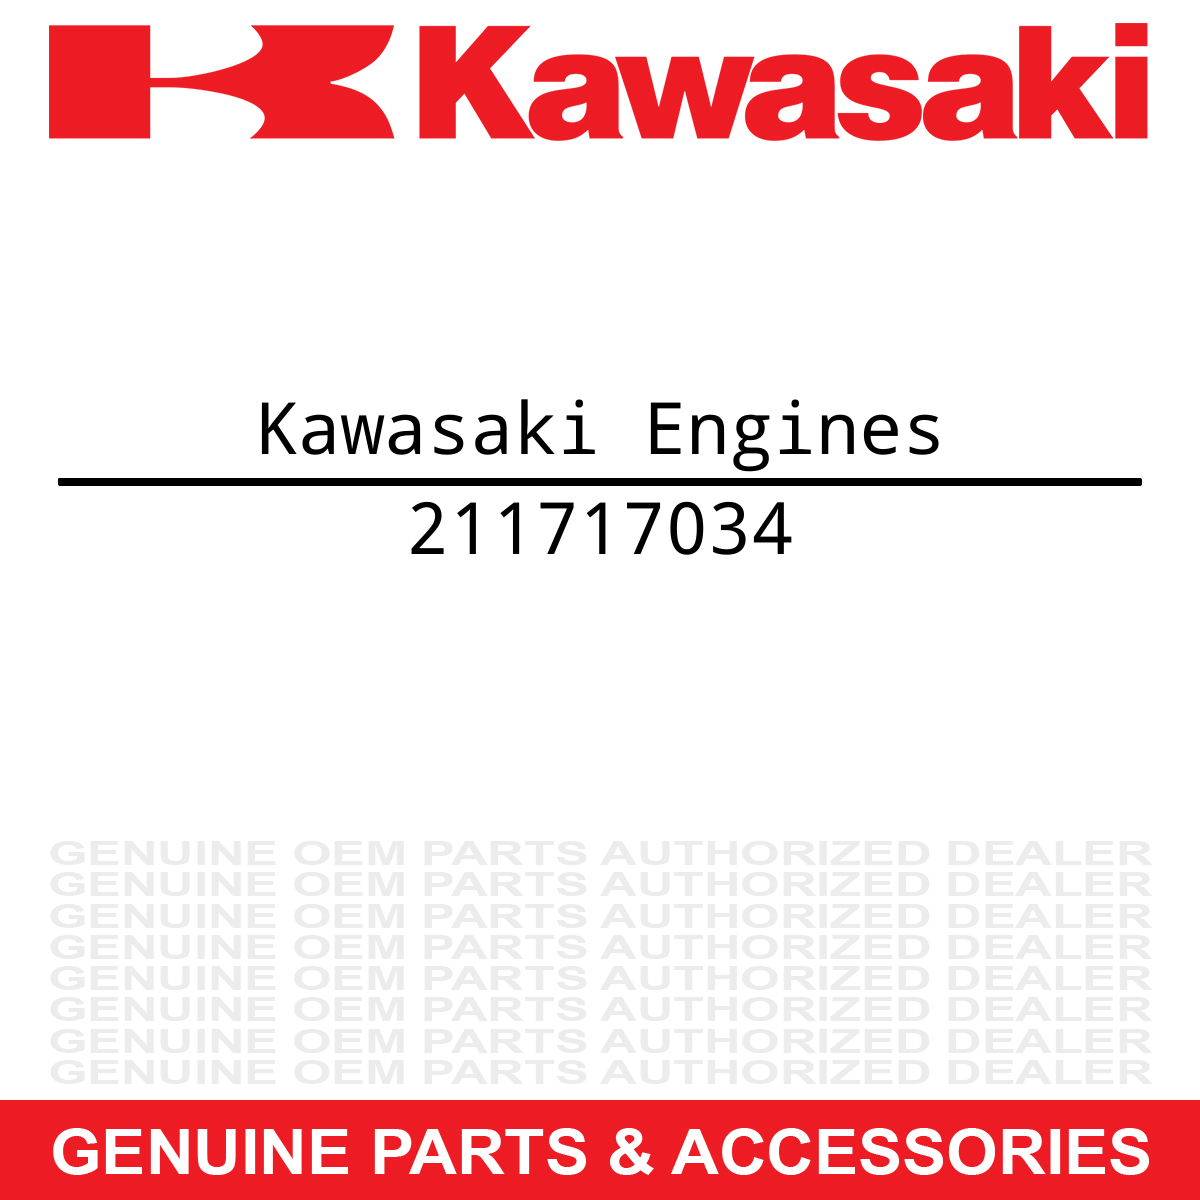 Kawasaki 21171-7034 Ignition Coil 4 Stroke Engine FH 381 430 480 500 541 580 - image 1 of 4